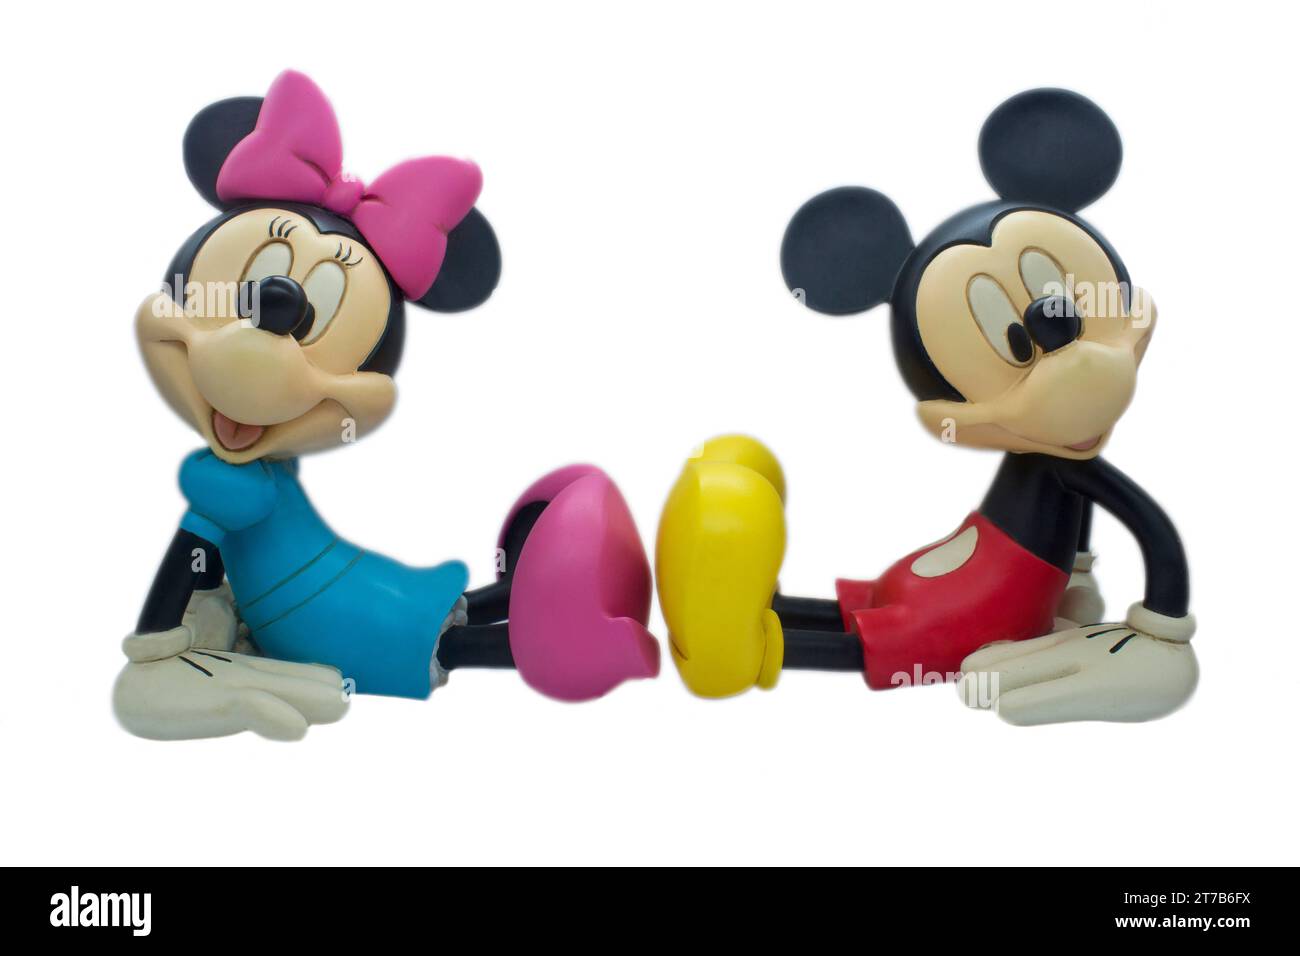 Studio image of Mickey mouse and Minnie mouse on a white isolated background. Stock Photo